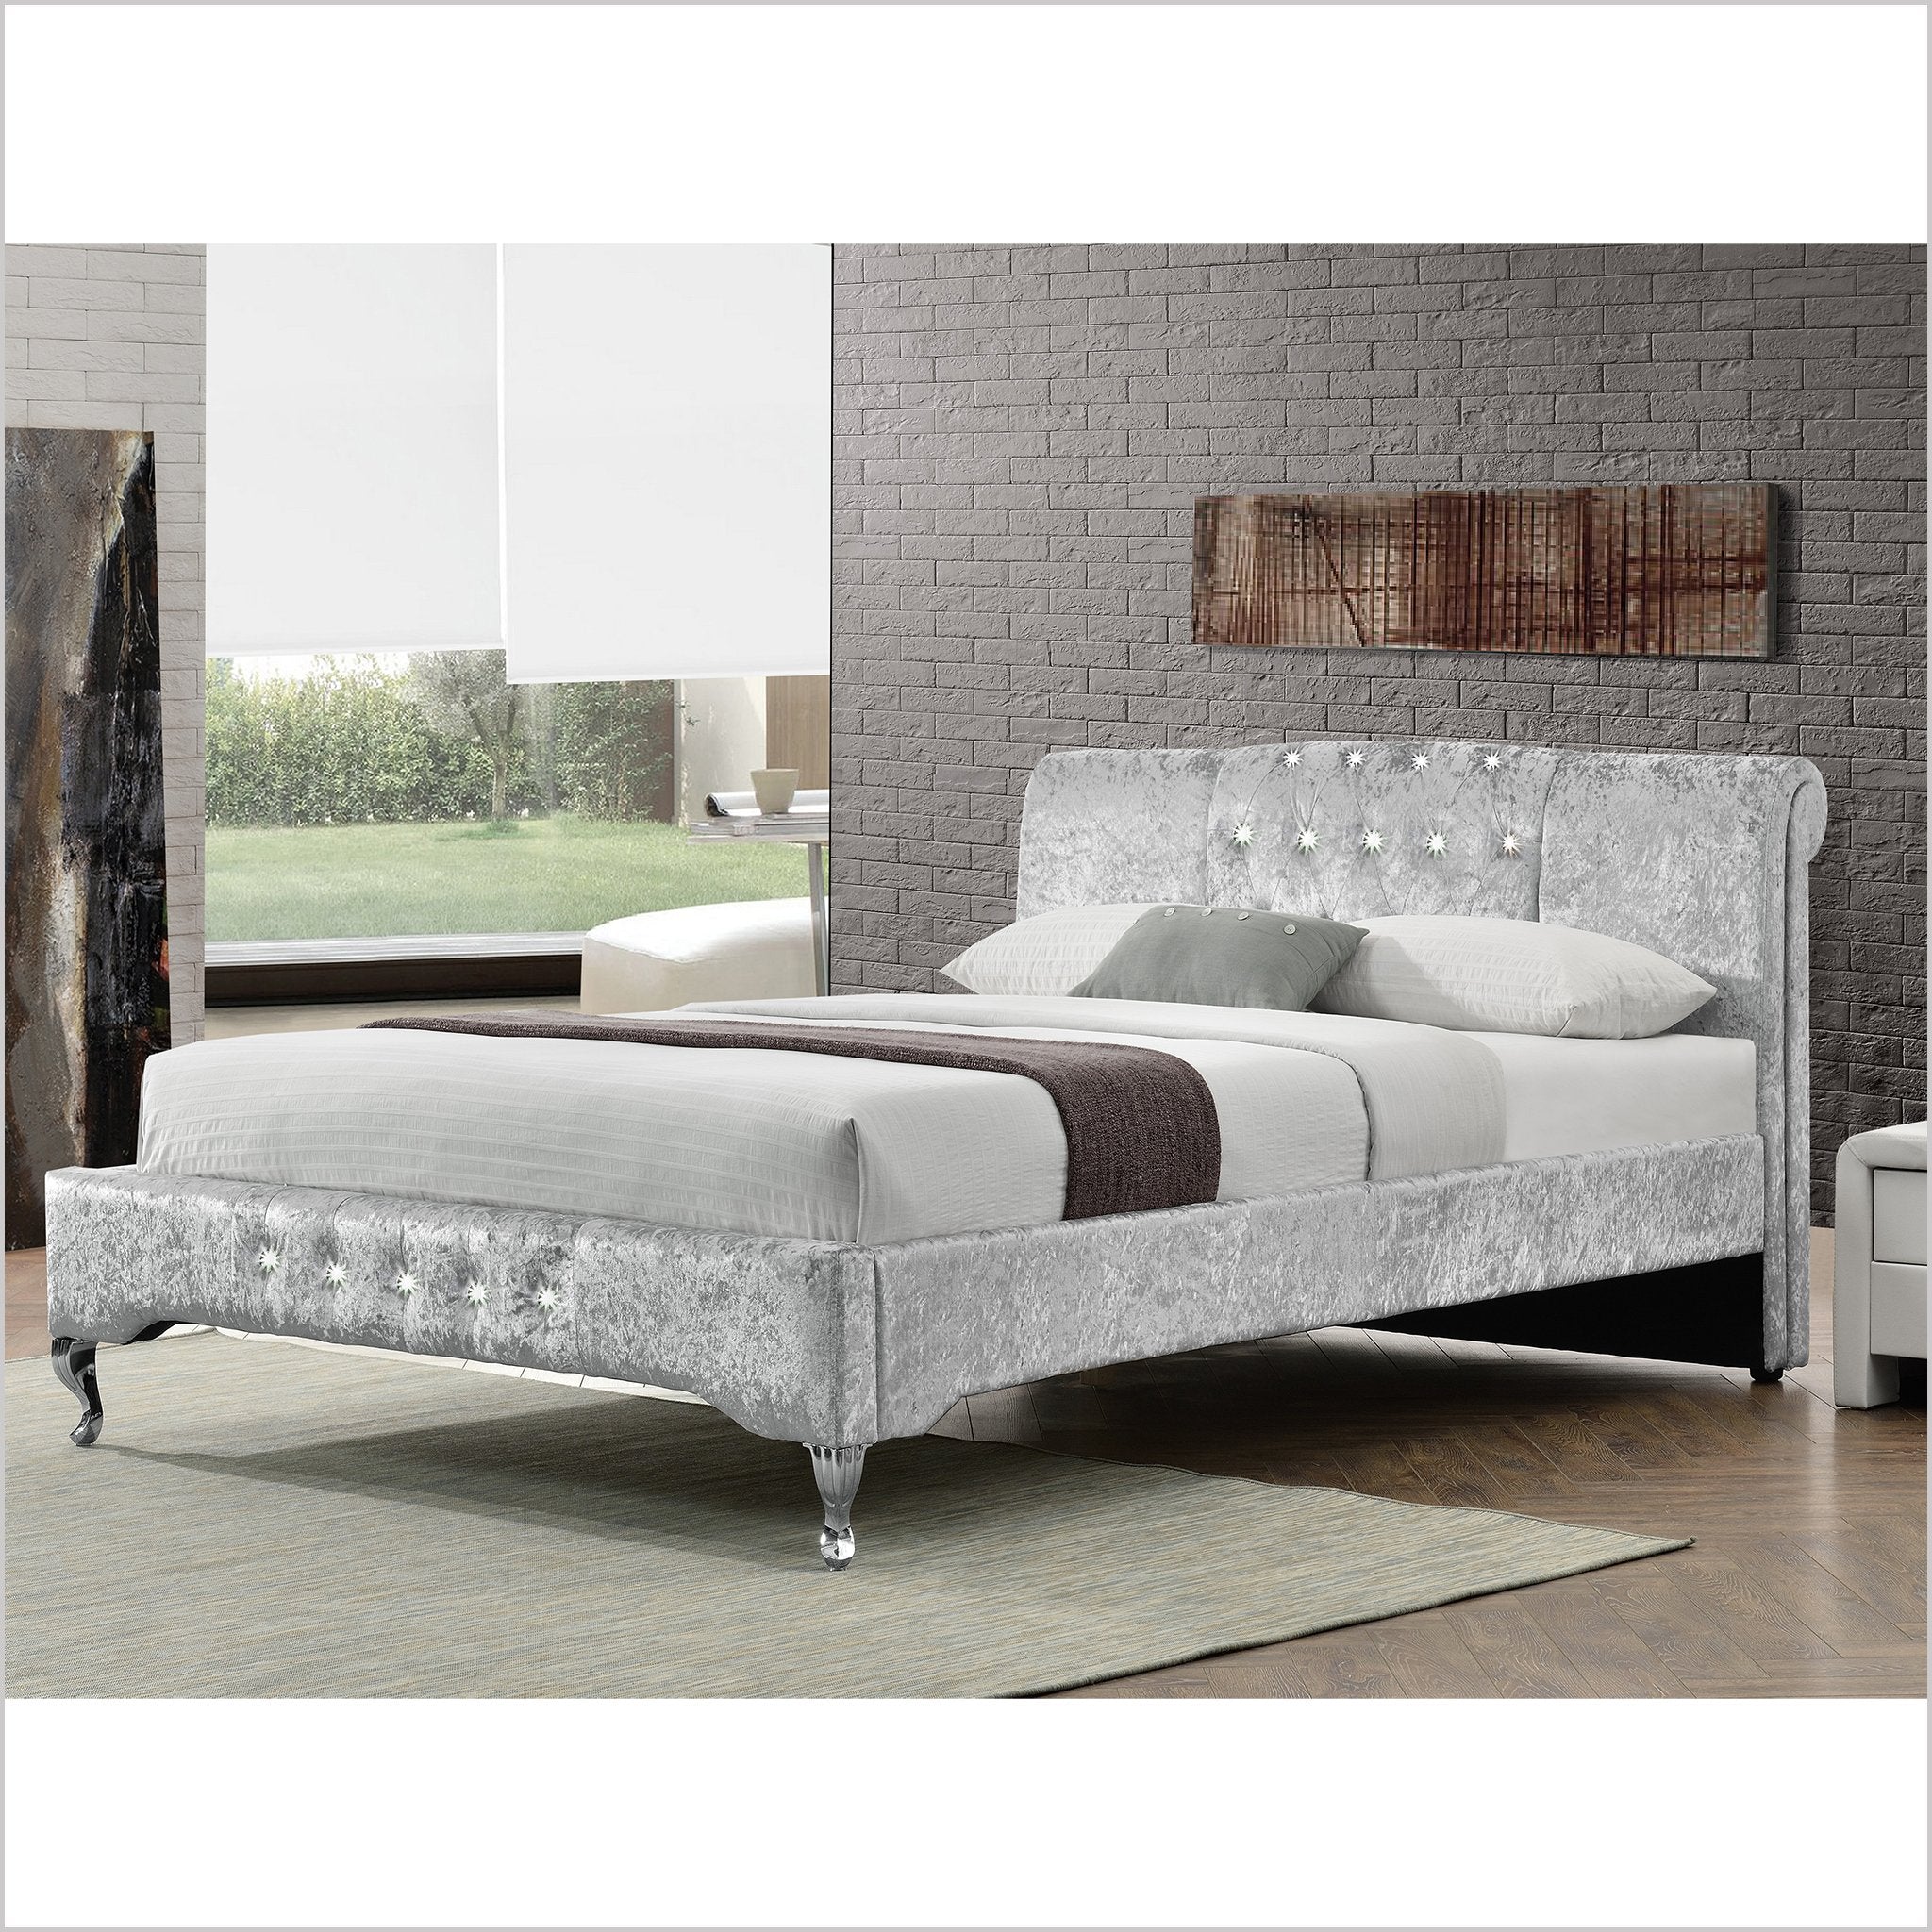 CHARA Diamante Headboard Luxury Crushed Velvet Bed Bed Frame, Silver